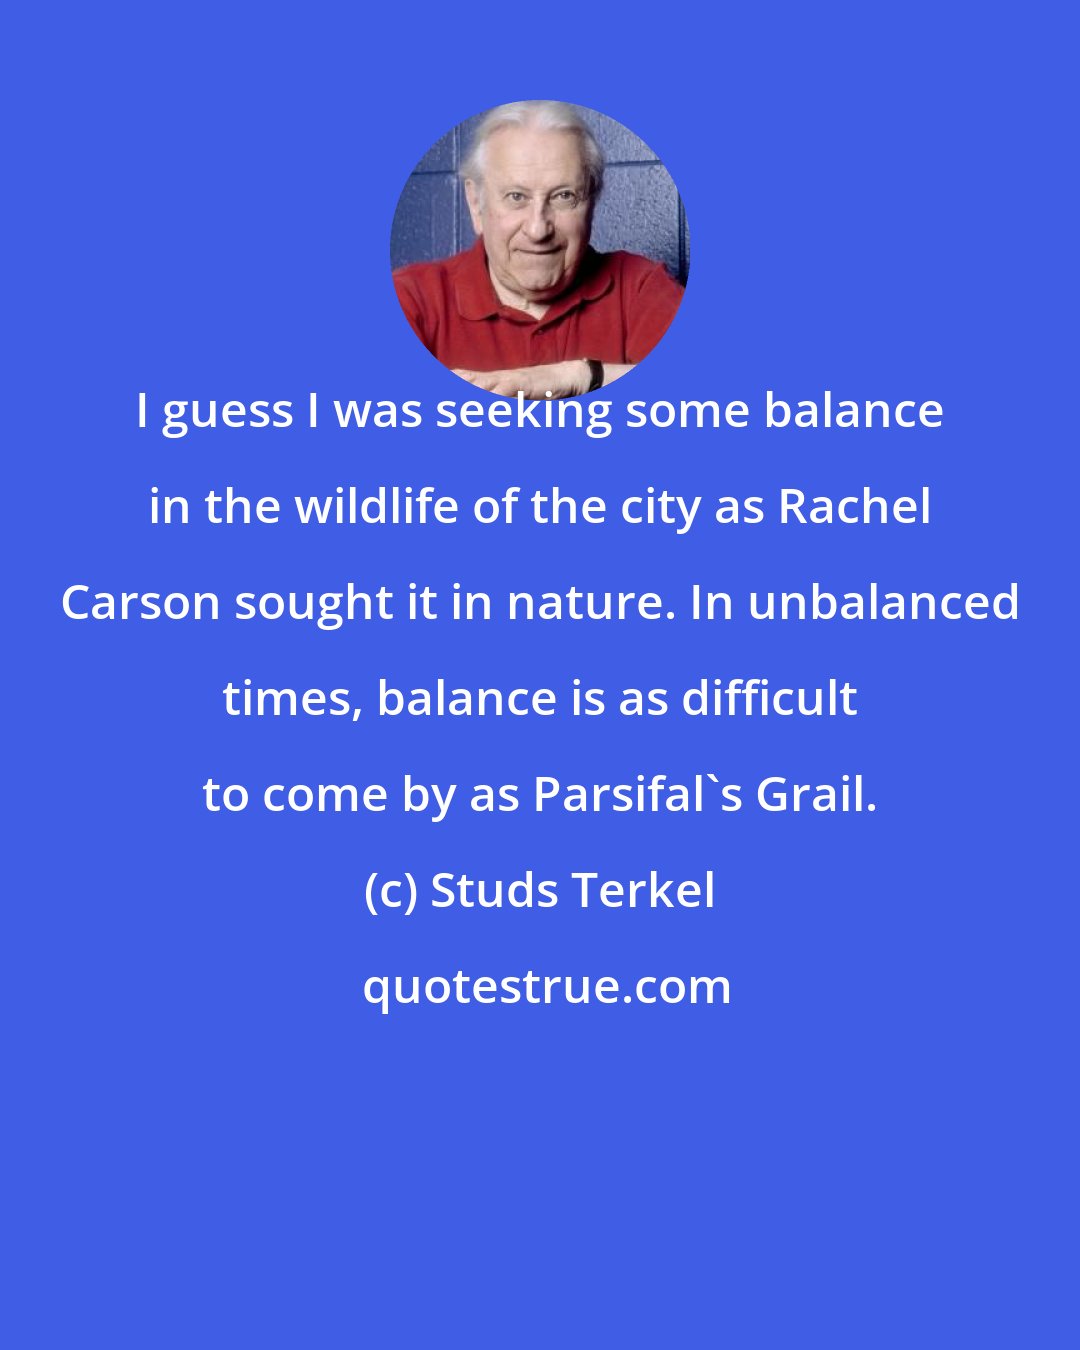 Studs Terkel: I guess I was seeking some balance in the wildlife of the city as Rachel Carson sought it in nature. In unbalanced times, balance is as difficult to come by as Parsifal's Grail.